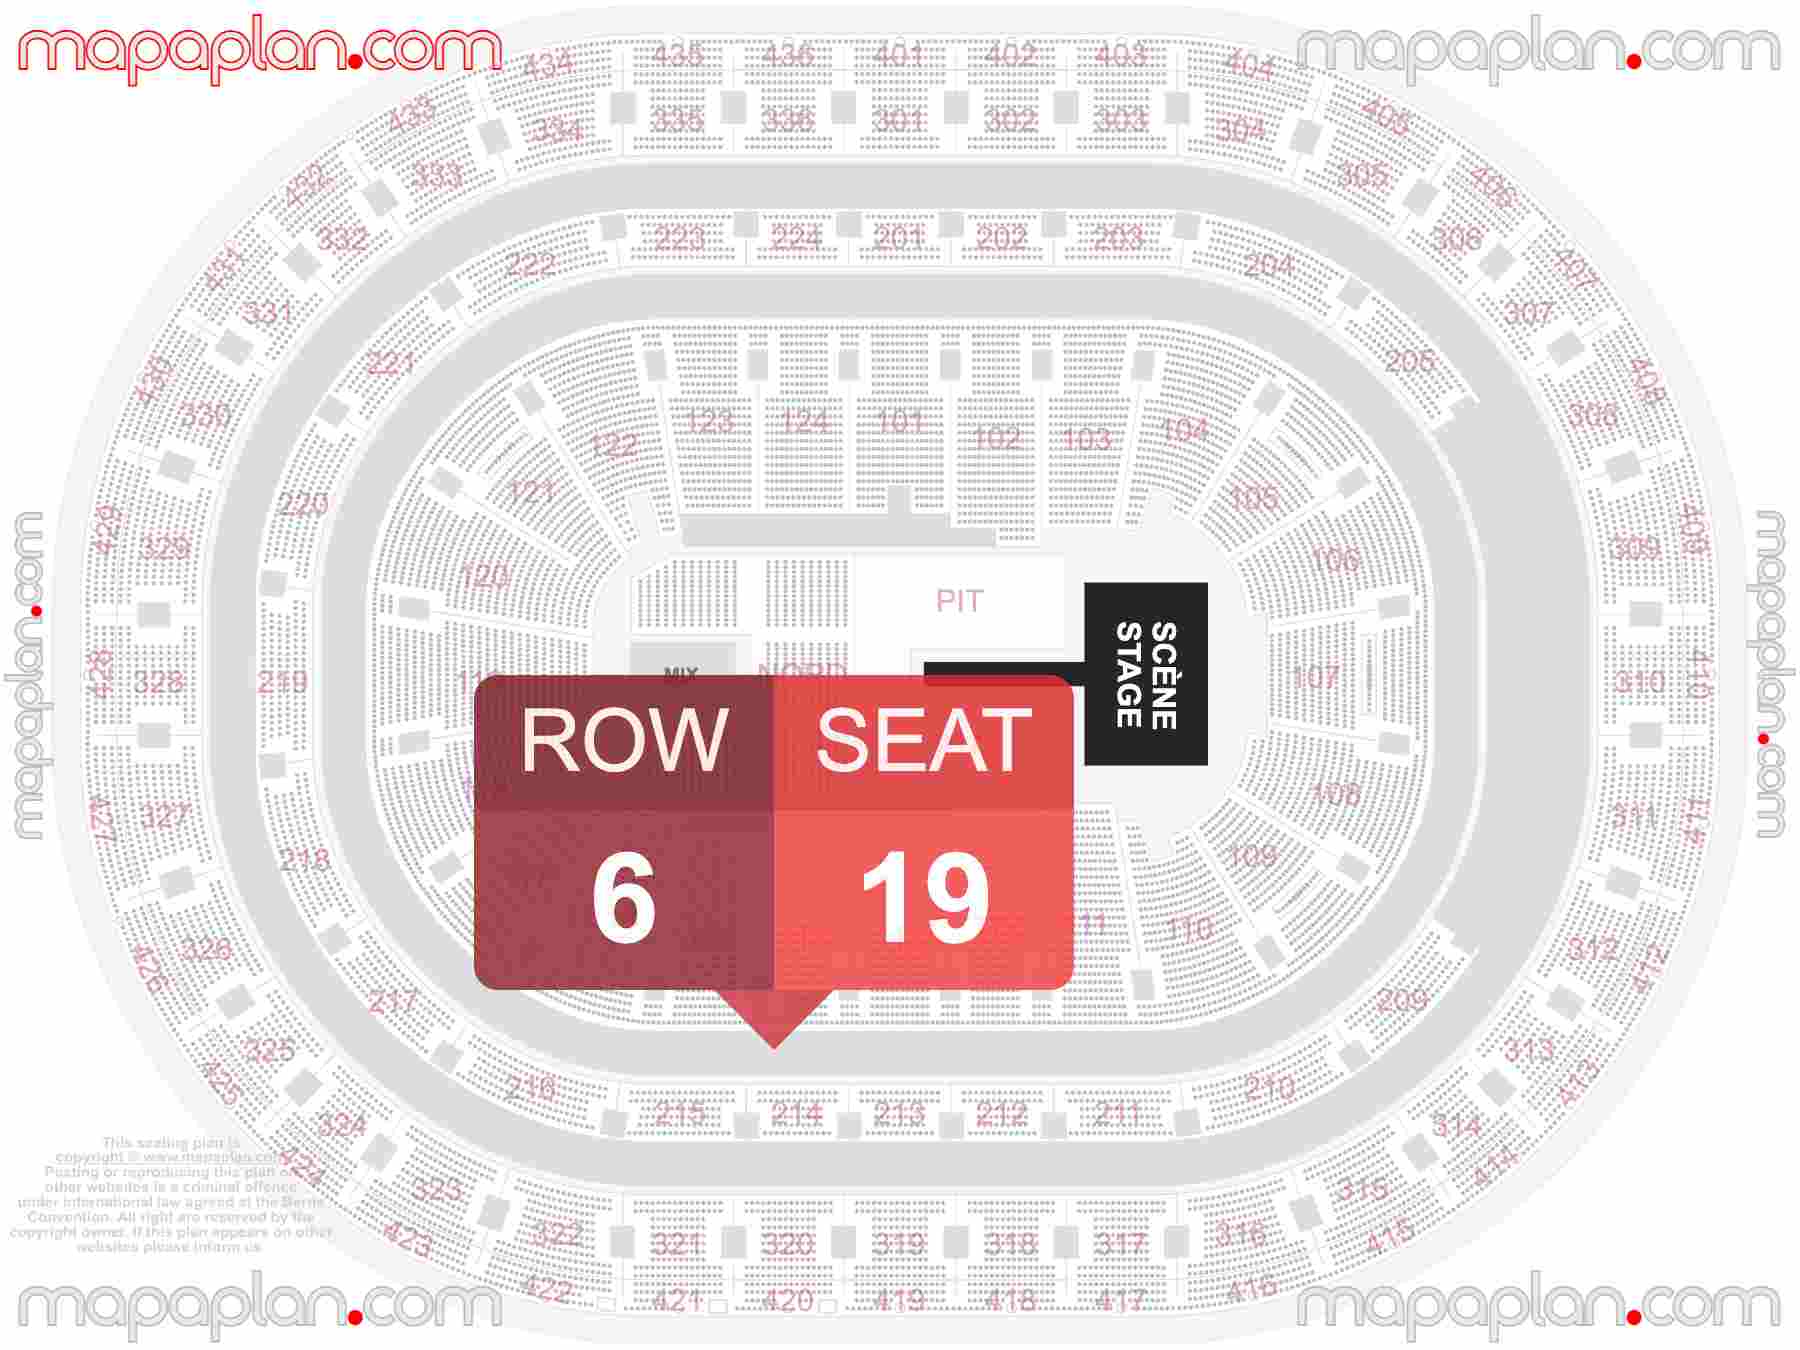 Montreal Bell Centre seating map Concert with PIT floor standing interactive seating checker map chart showing seat numbers per row - Ticket prices sections review diagram